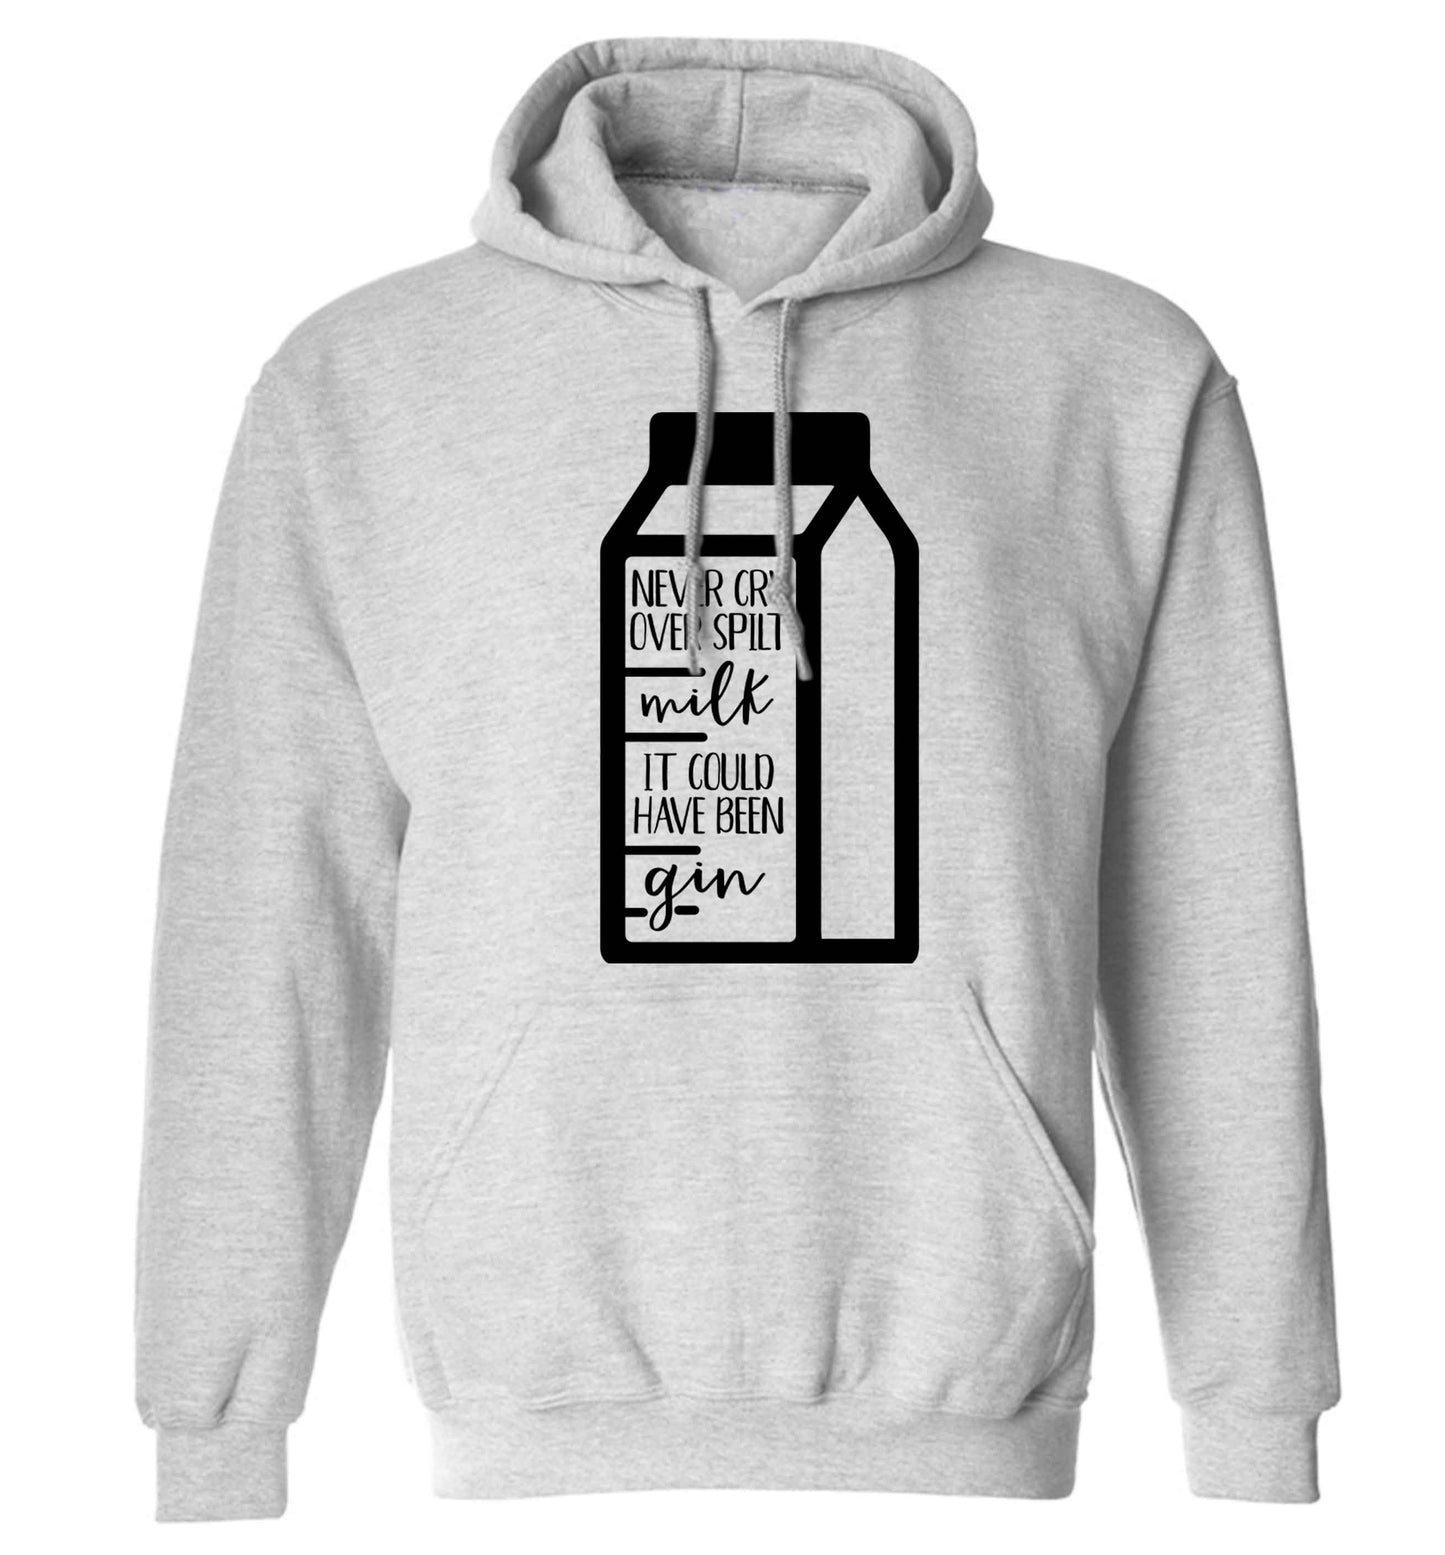 Never cry over spilt milk, it could have been gin adults unisex grey hoodie 2XL